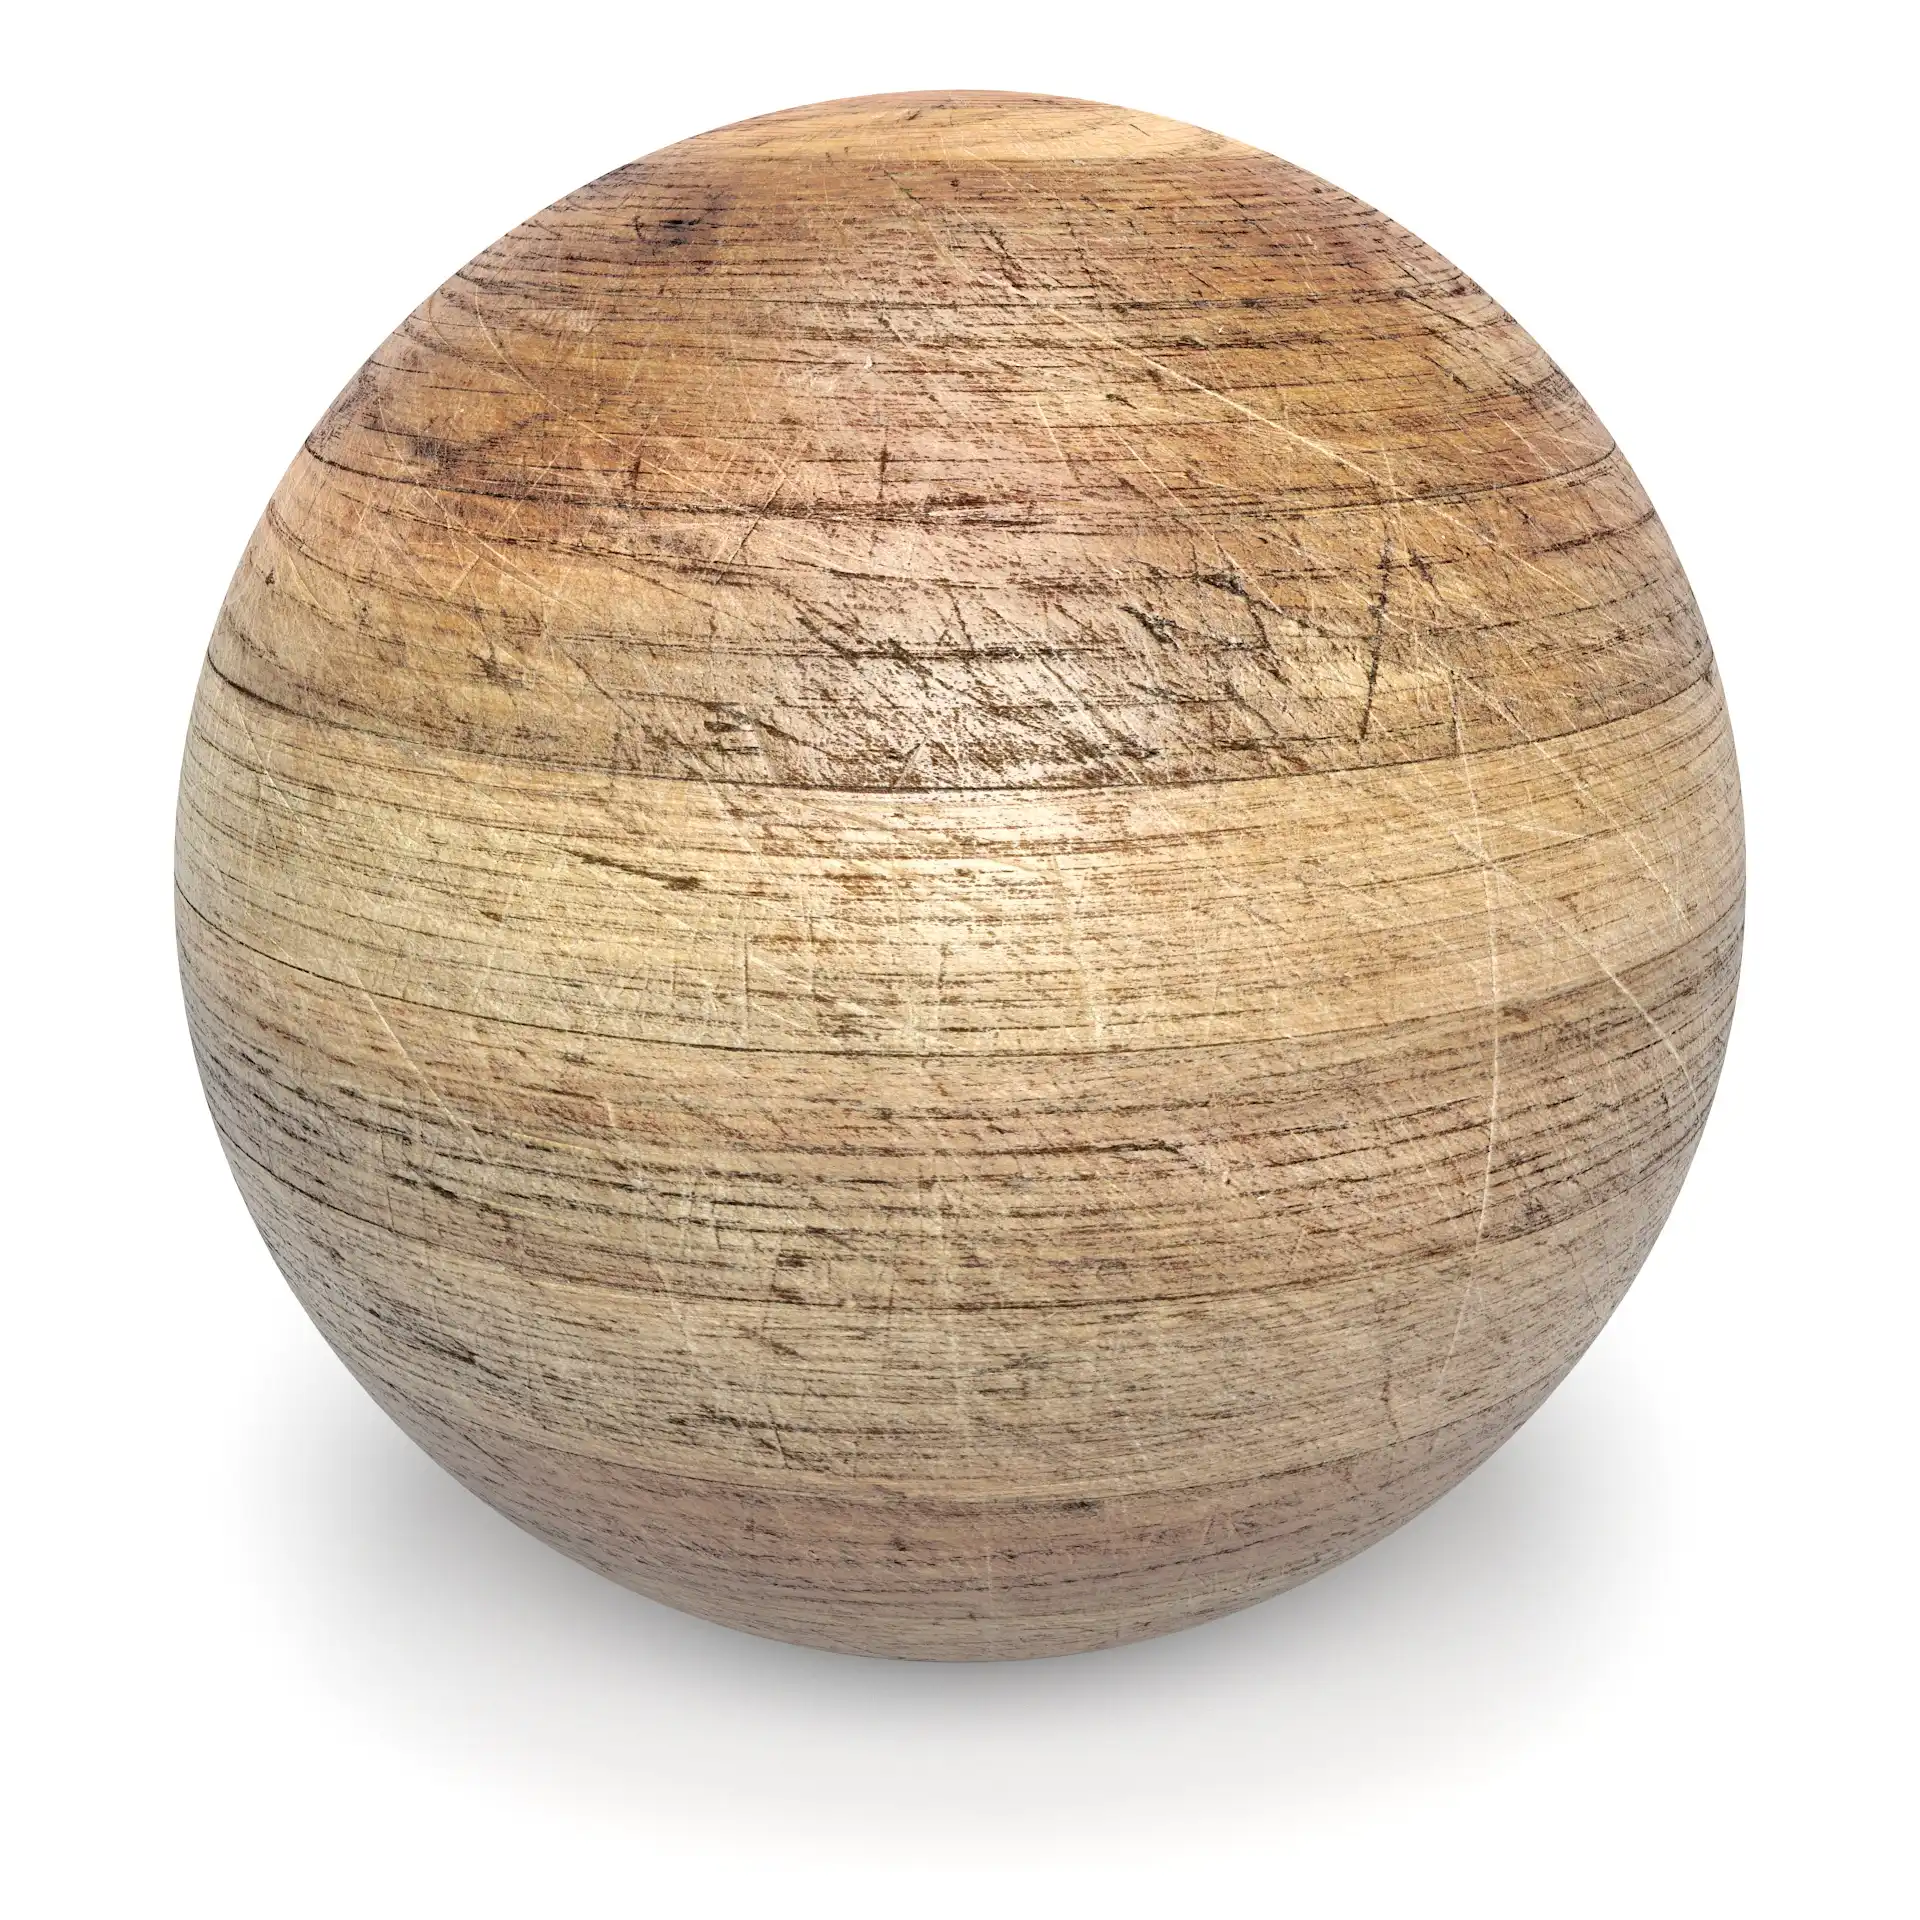 An example of a physically based rendering of material in a white studio, created using a PBR set of textures of old scratched wood from a cutting board. Visualisation done in 3ds Max with V-Ray. VRayMtl used as base material.